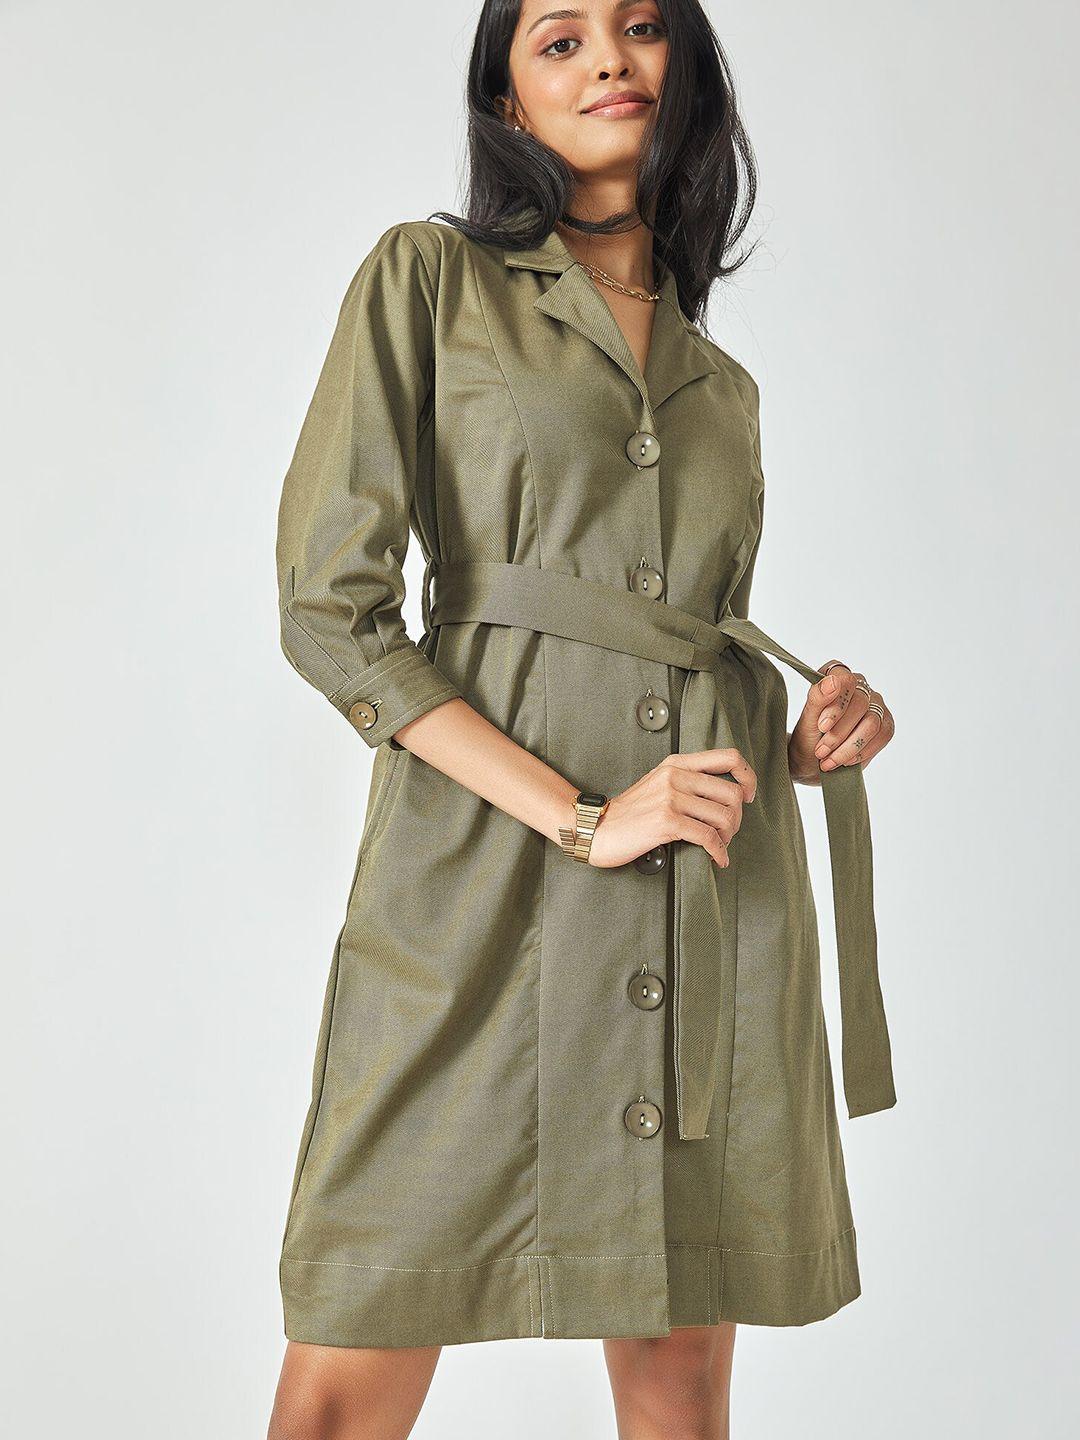 the-label-life-olive-green-lapel-belted-shirt-dress